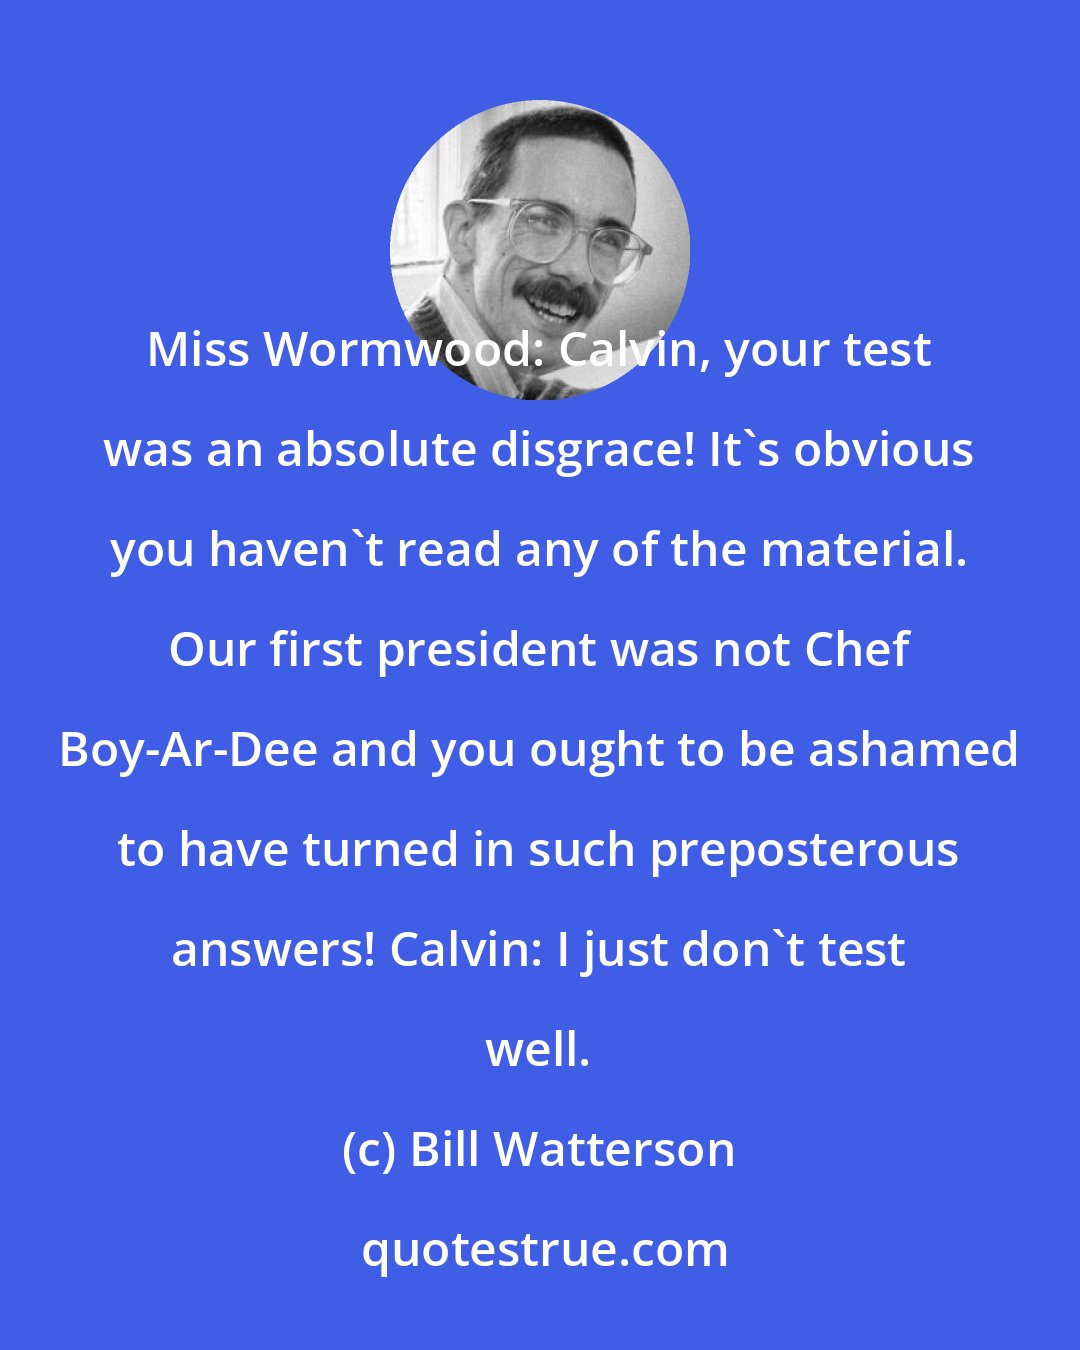 Bill Watterson: Miss Wormwood: Calvin, your test was an absolute disgrace! It's obvious you haven't read any of the material. Our first president was not Chef Boy-Ar-Dee and you ought to be ashamed to have turned in such preposterous answers! Calvin: I just don't test well.